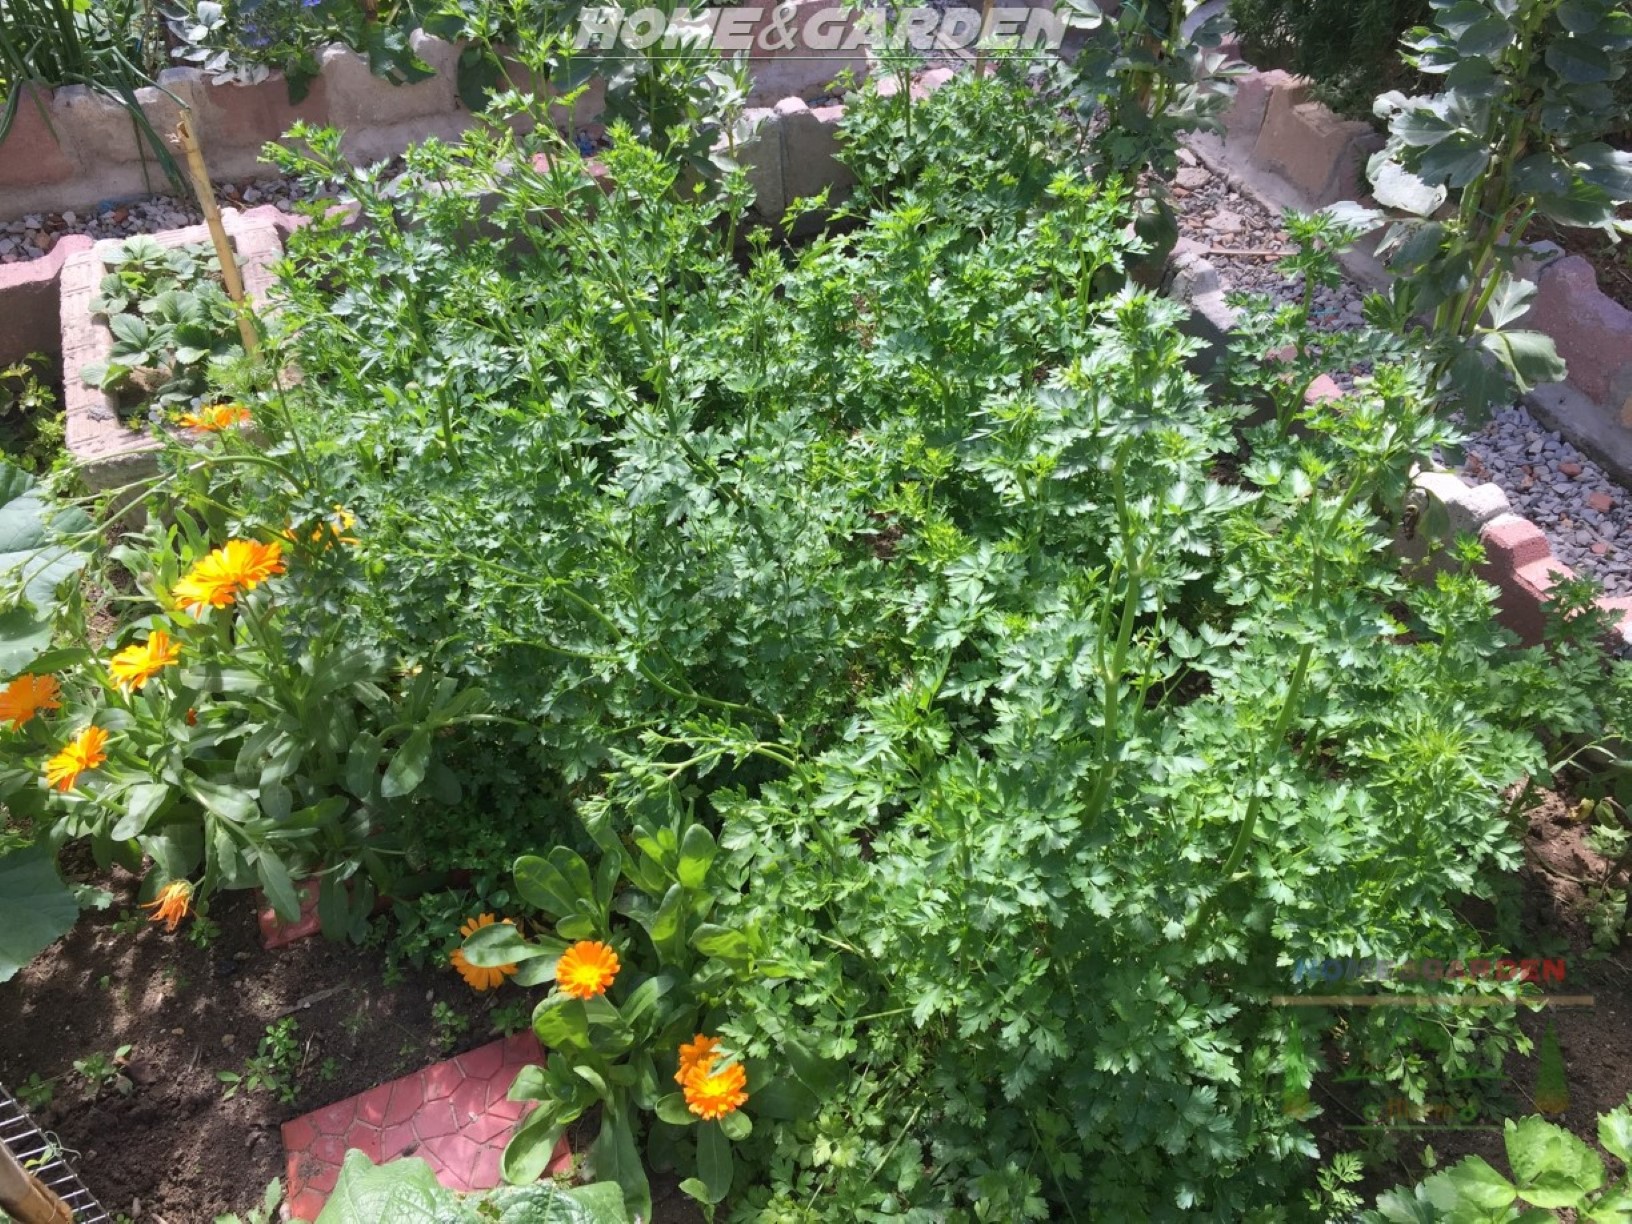 Parsley (Petroselinum crispum) is a hardy herb grown for its flavor, which is added to many dishes, as well as its use as a decorative garnish. Parsley is one of the most popular herbs used in cooking.